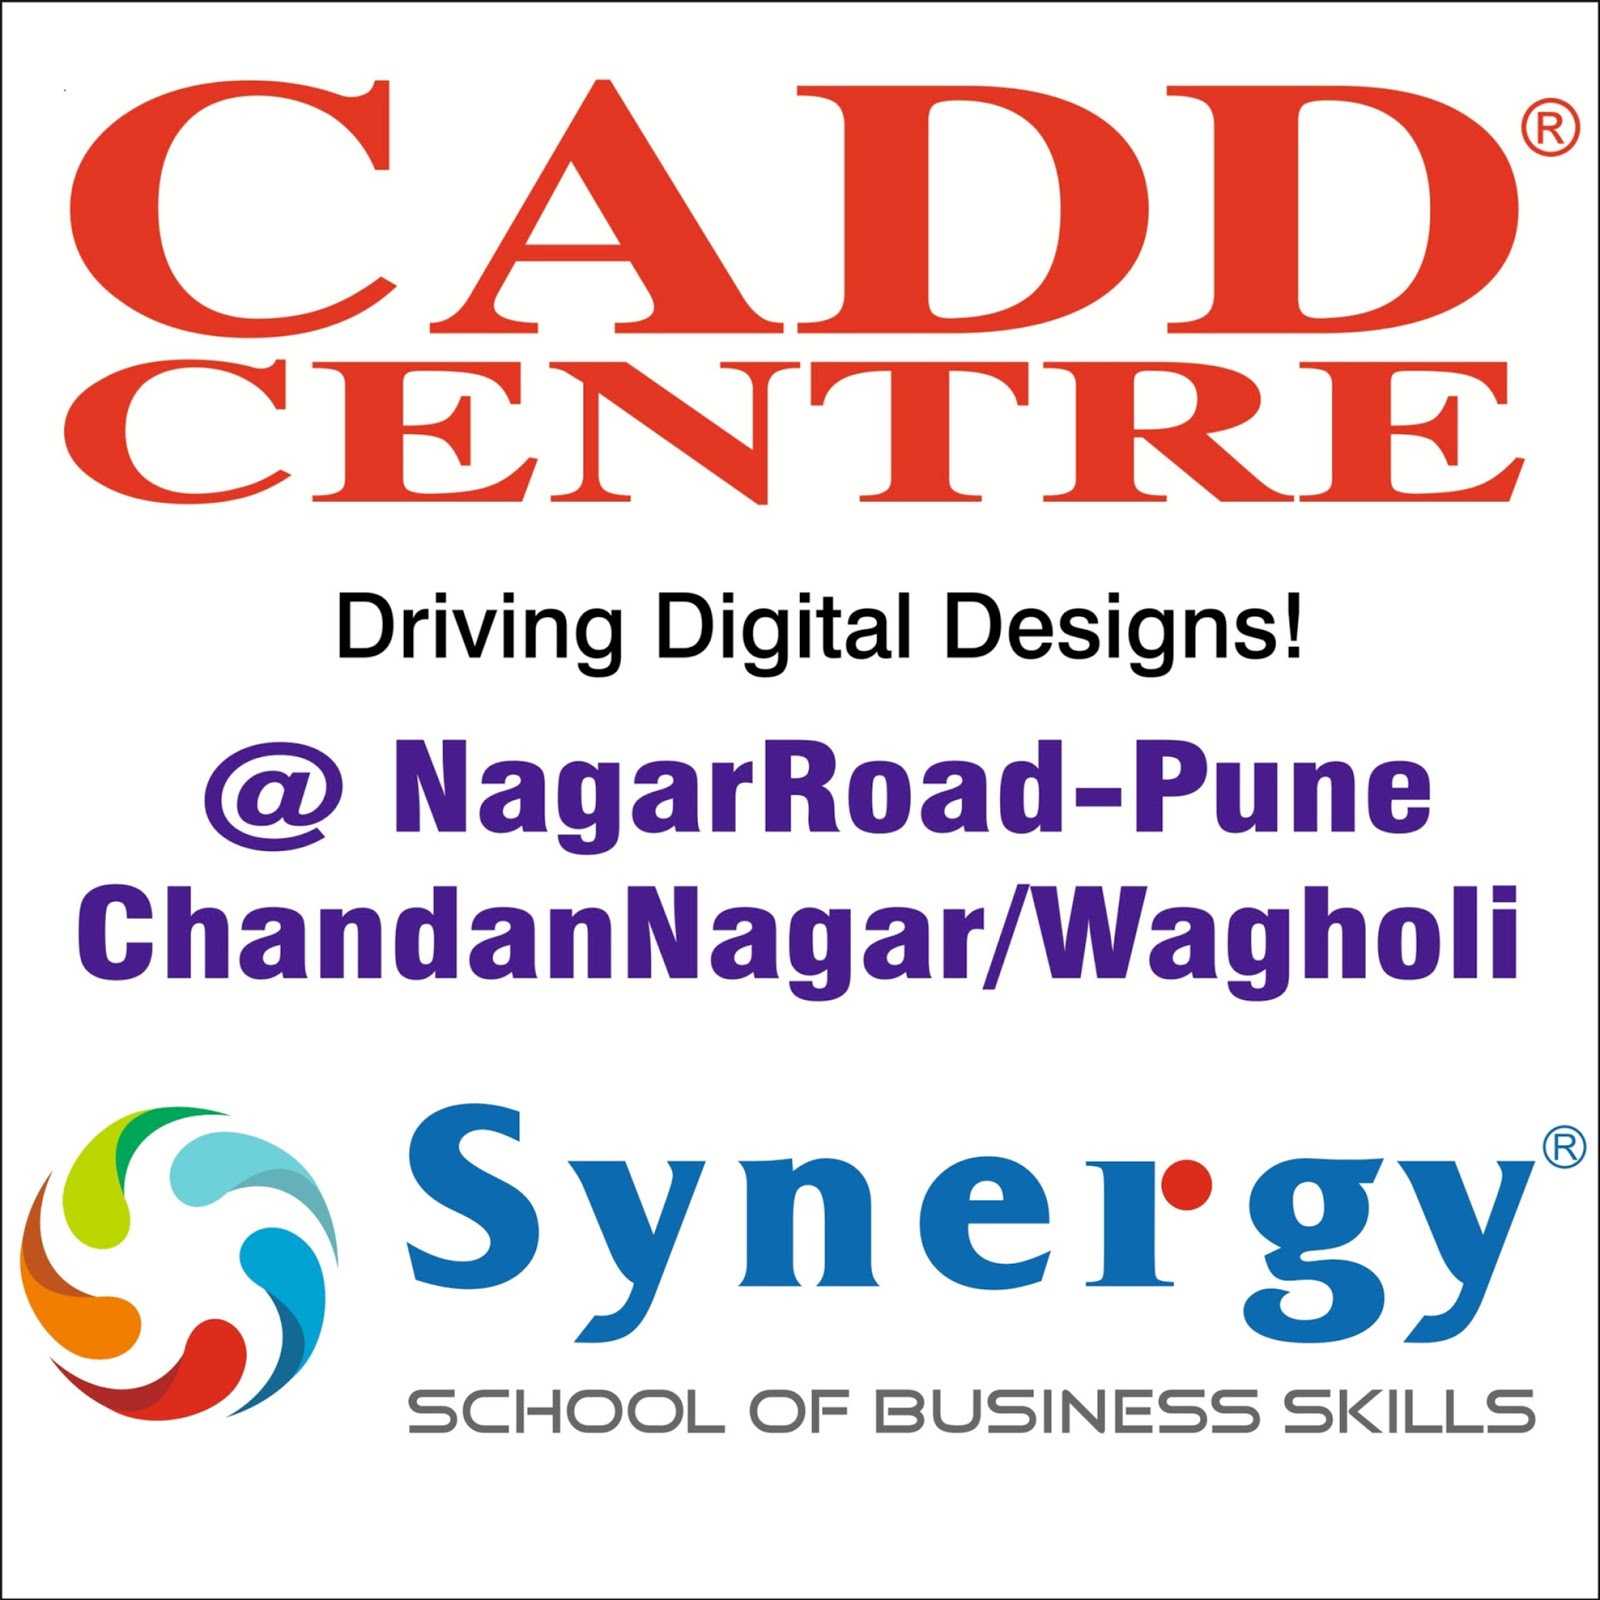 CADD Centre in Ahmedabad - Best Computer Training Institutes For  Architectural CAD in Ahmedabad - Justdial